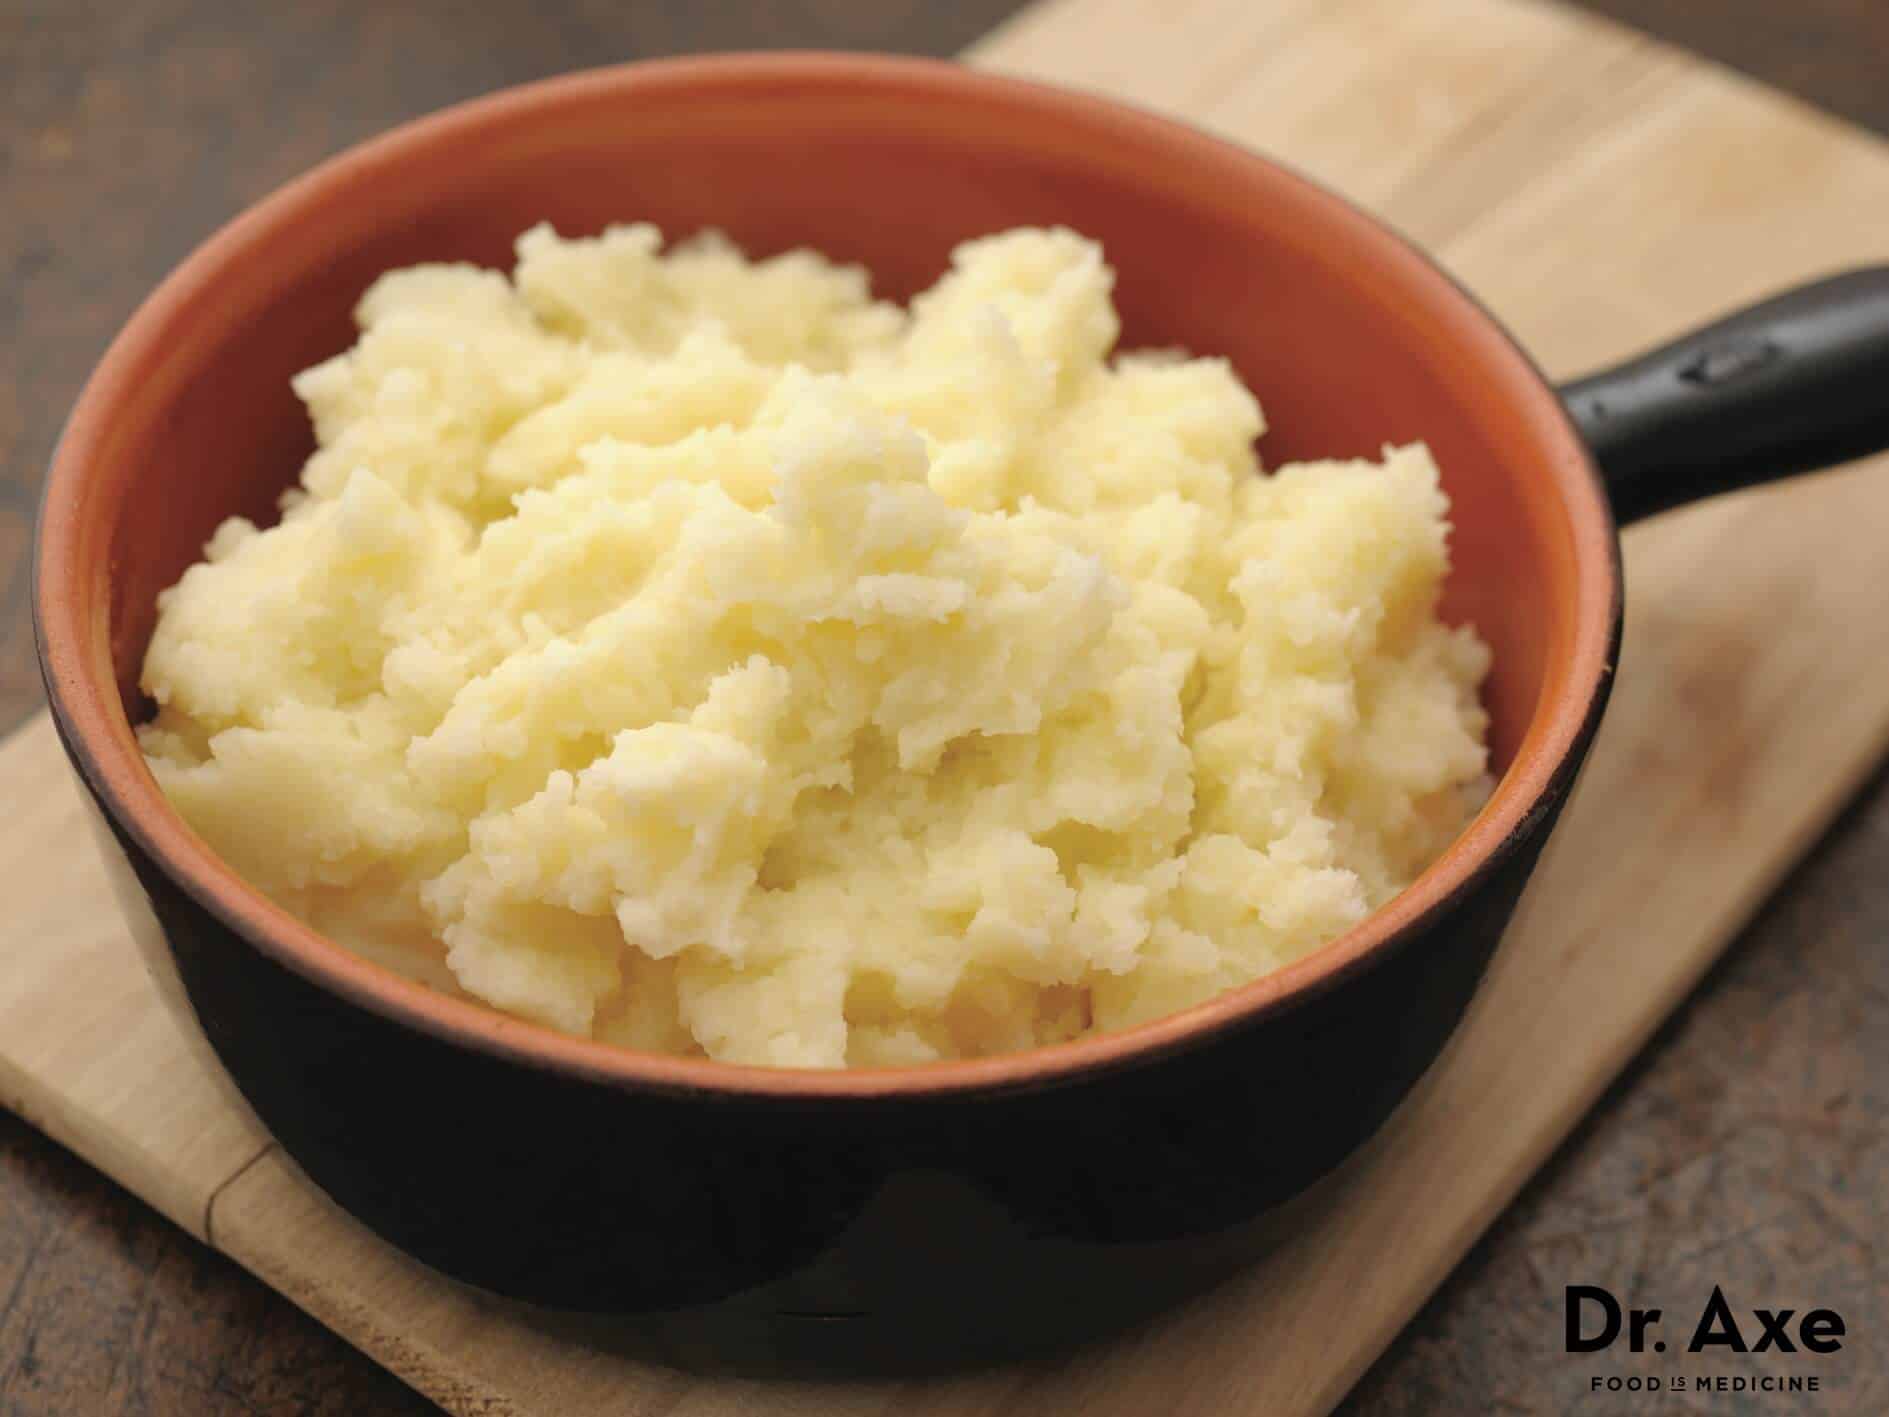 Mashed faux-tatoes recipe - Dr. Axe